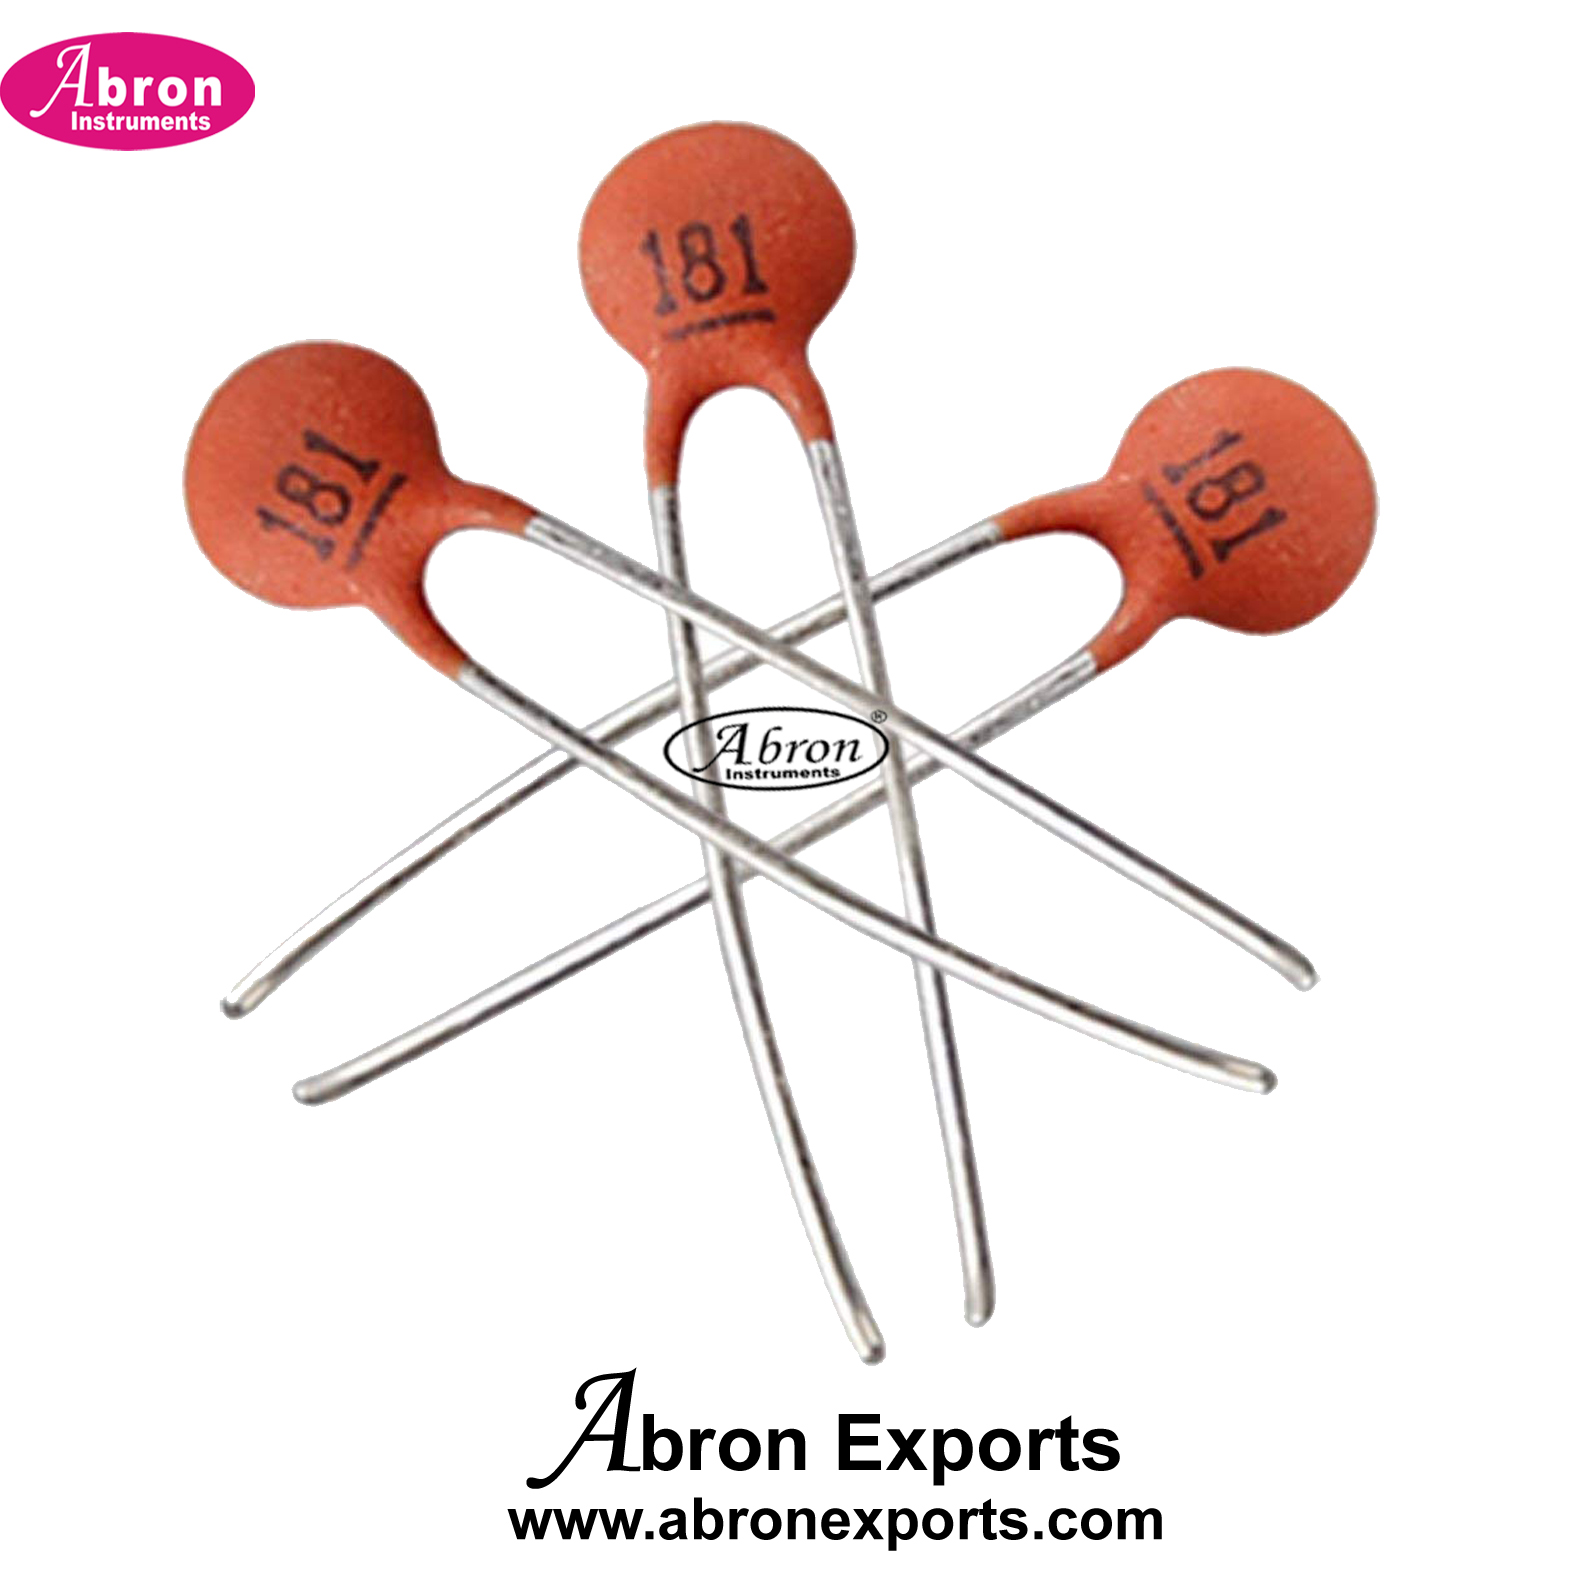 Electronic Component Spare Capacitor Ceramic Disc 50V 180pF Low Voltage 100pc Abron AE-1224C180pF 